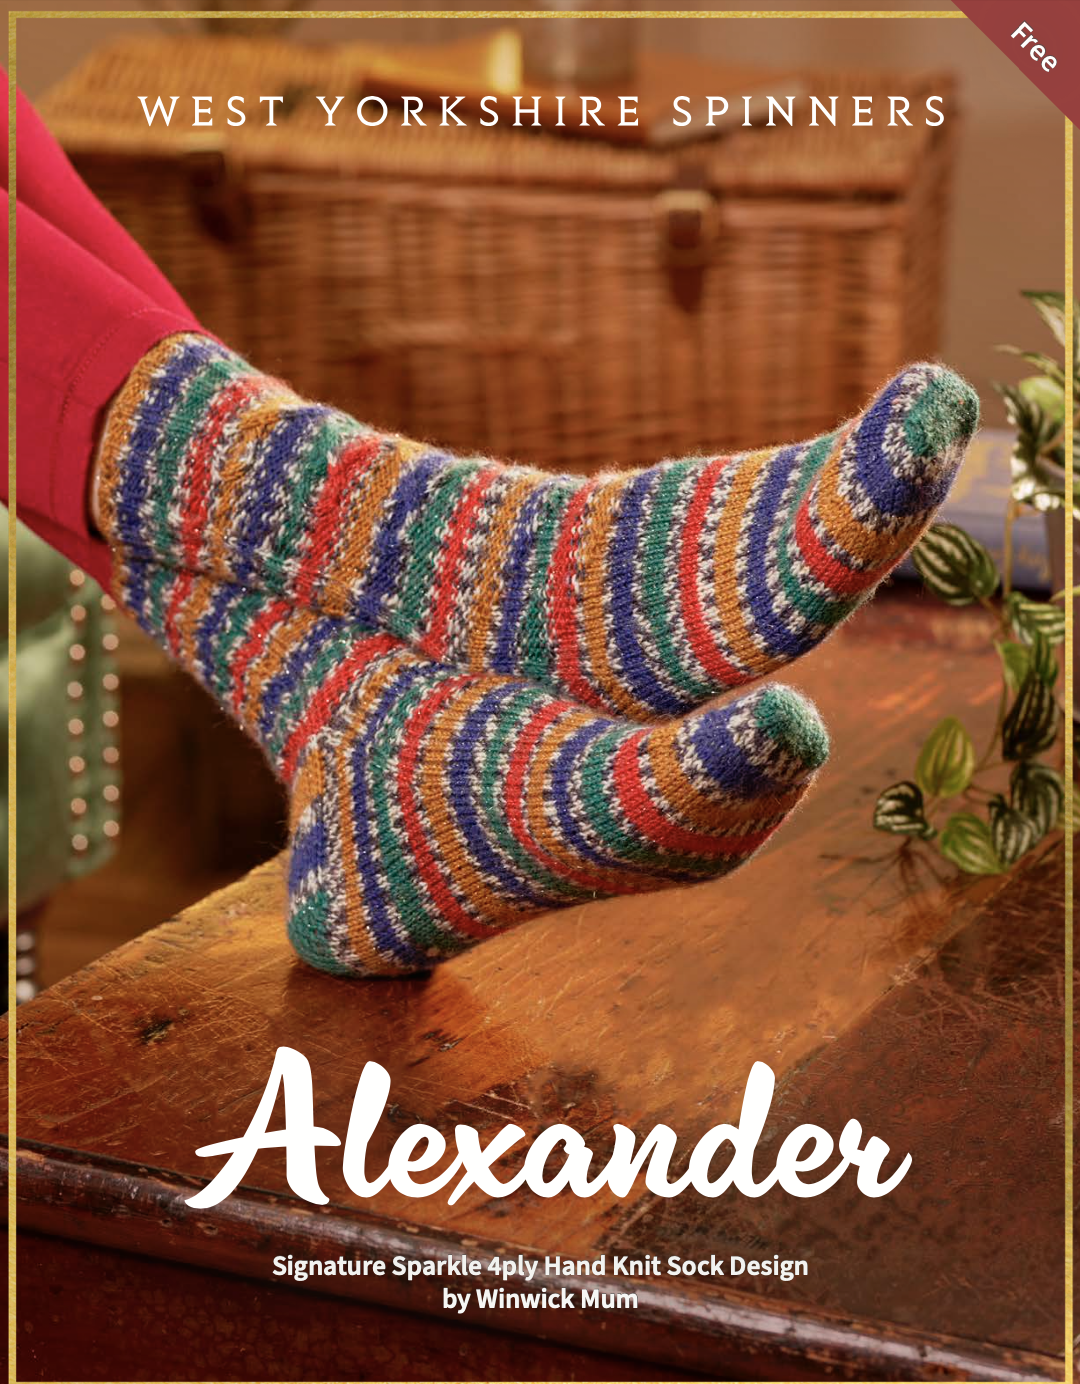 WYS Signature 4ply Alexander Socks Pattern (Free Download) product image